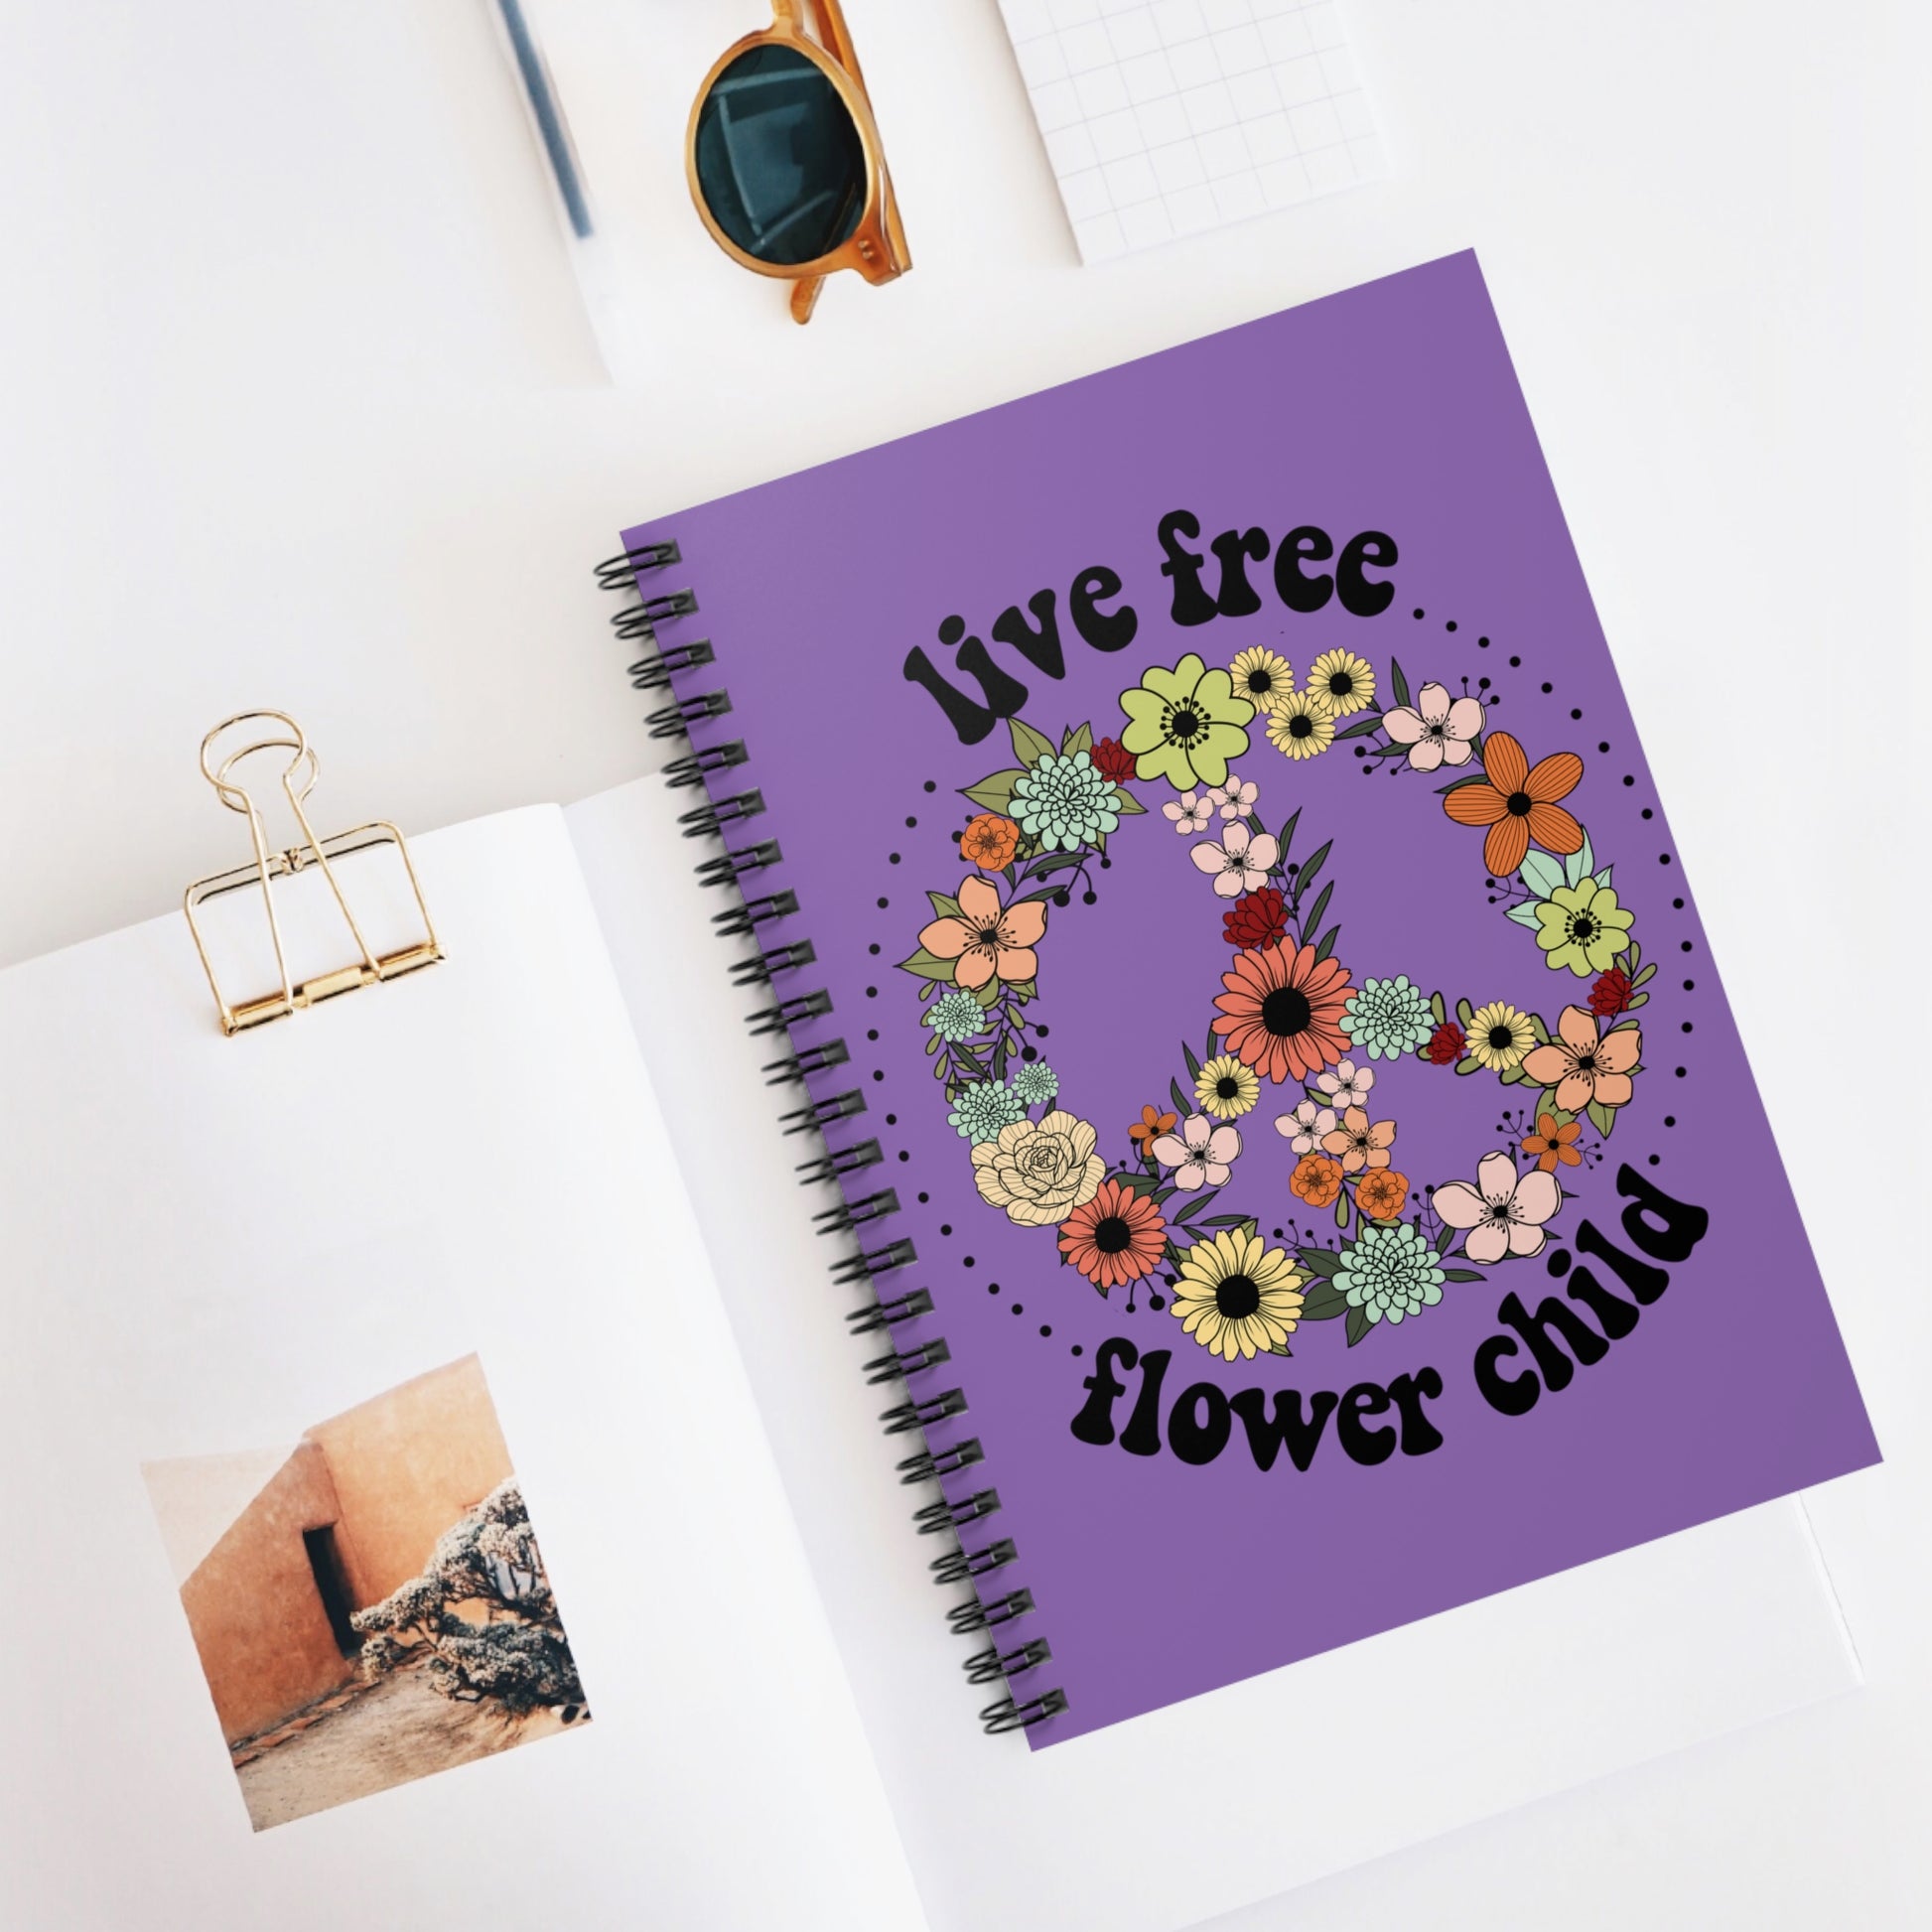 Live Free Flower Child: Spiral Notebook - Log Books - Journals - Diaries - and More Custom Printed by TheGlassyLass